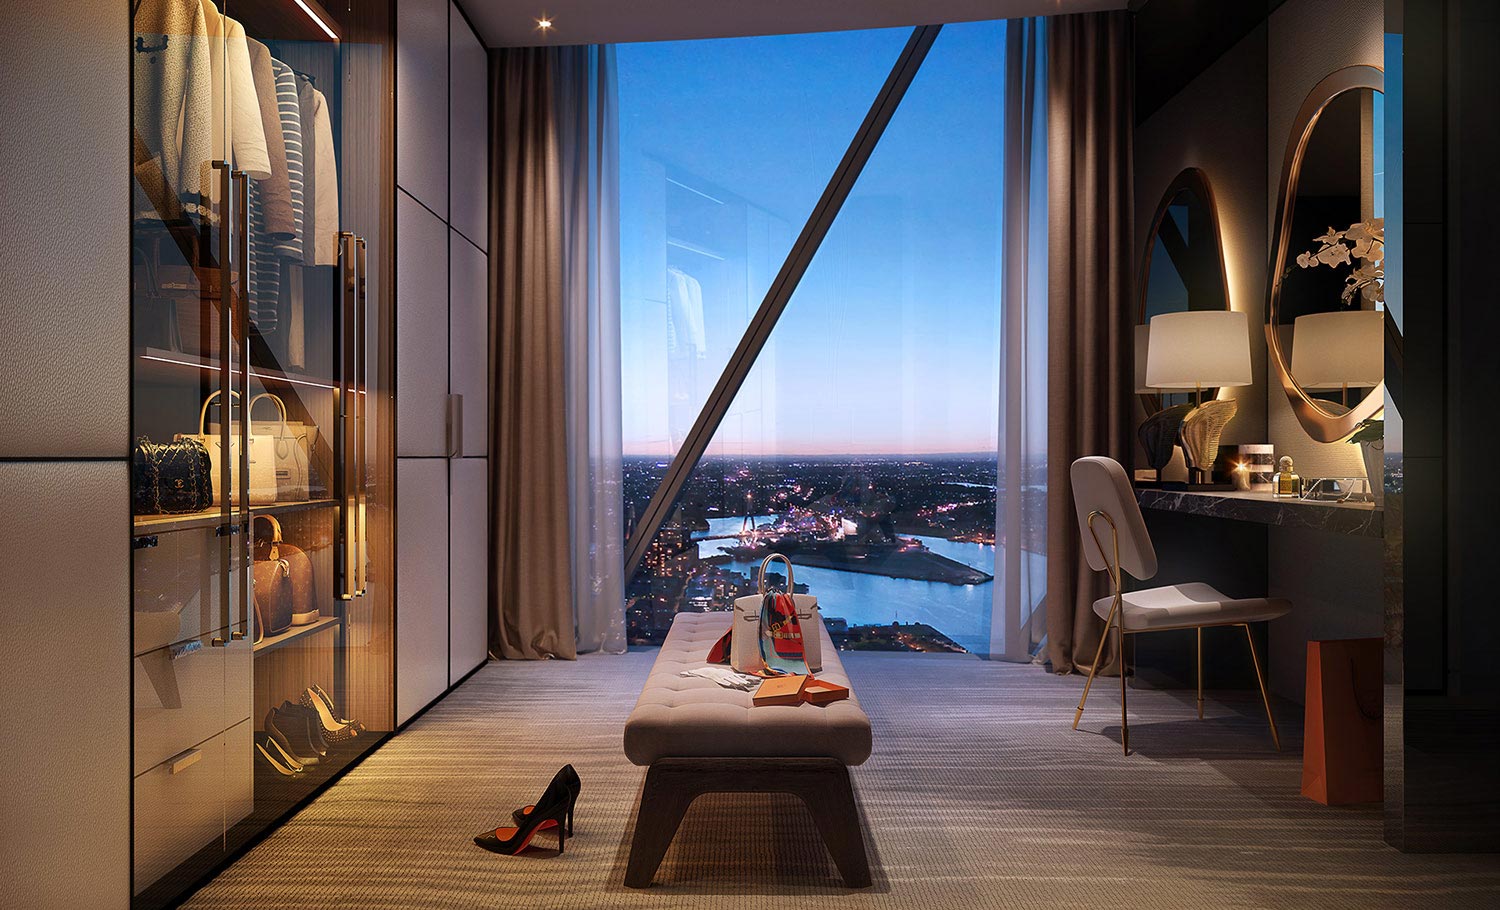 Crown casino sydney apartments for sale by owner